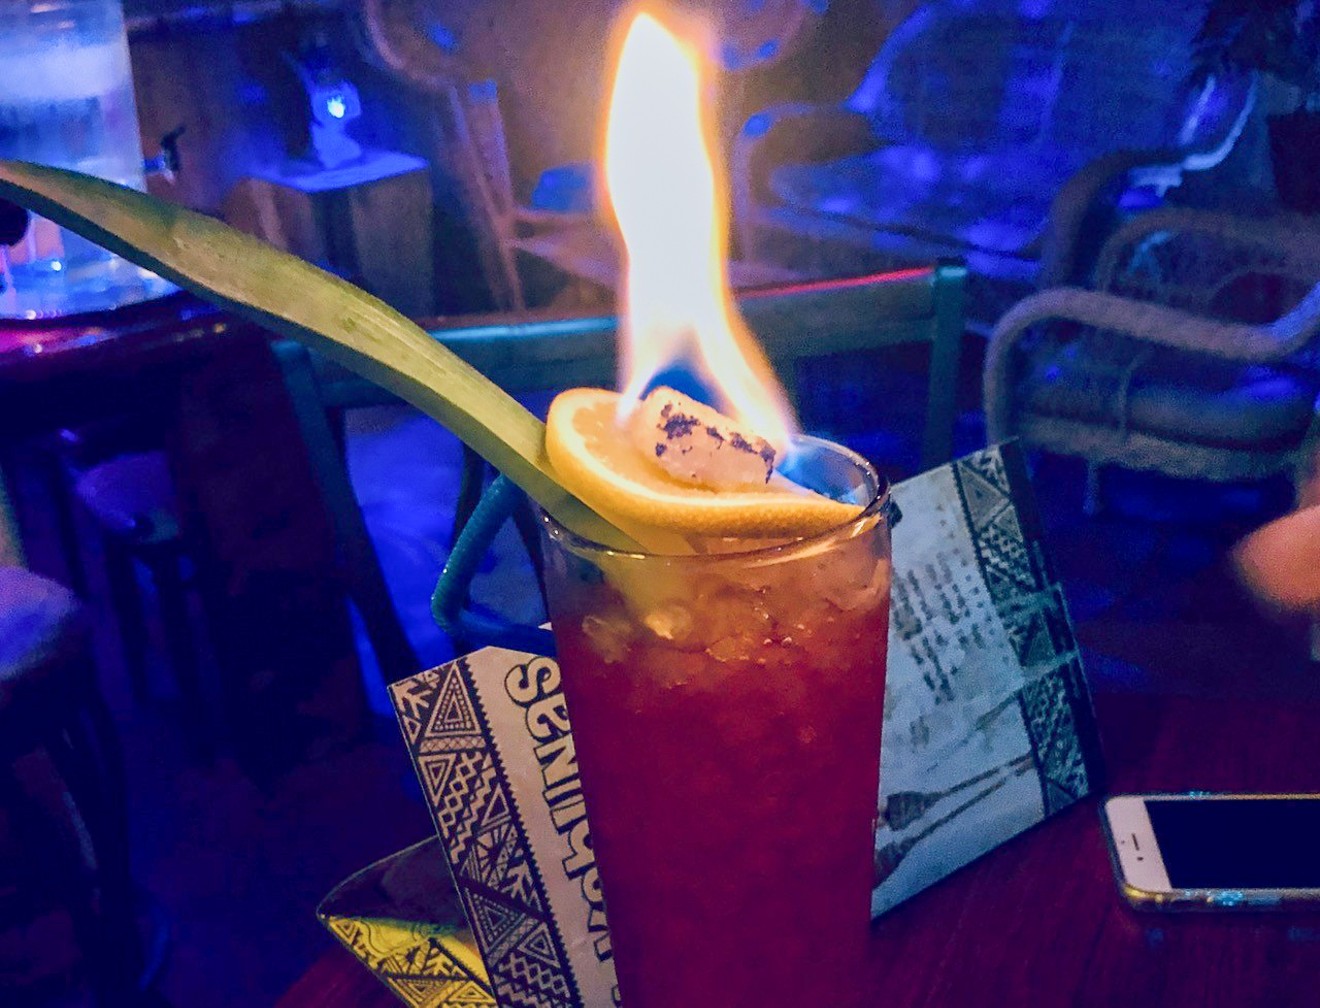 A photo from back in the days when we could get flaming rum drinks in bars